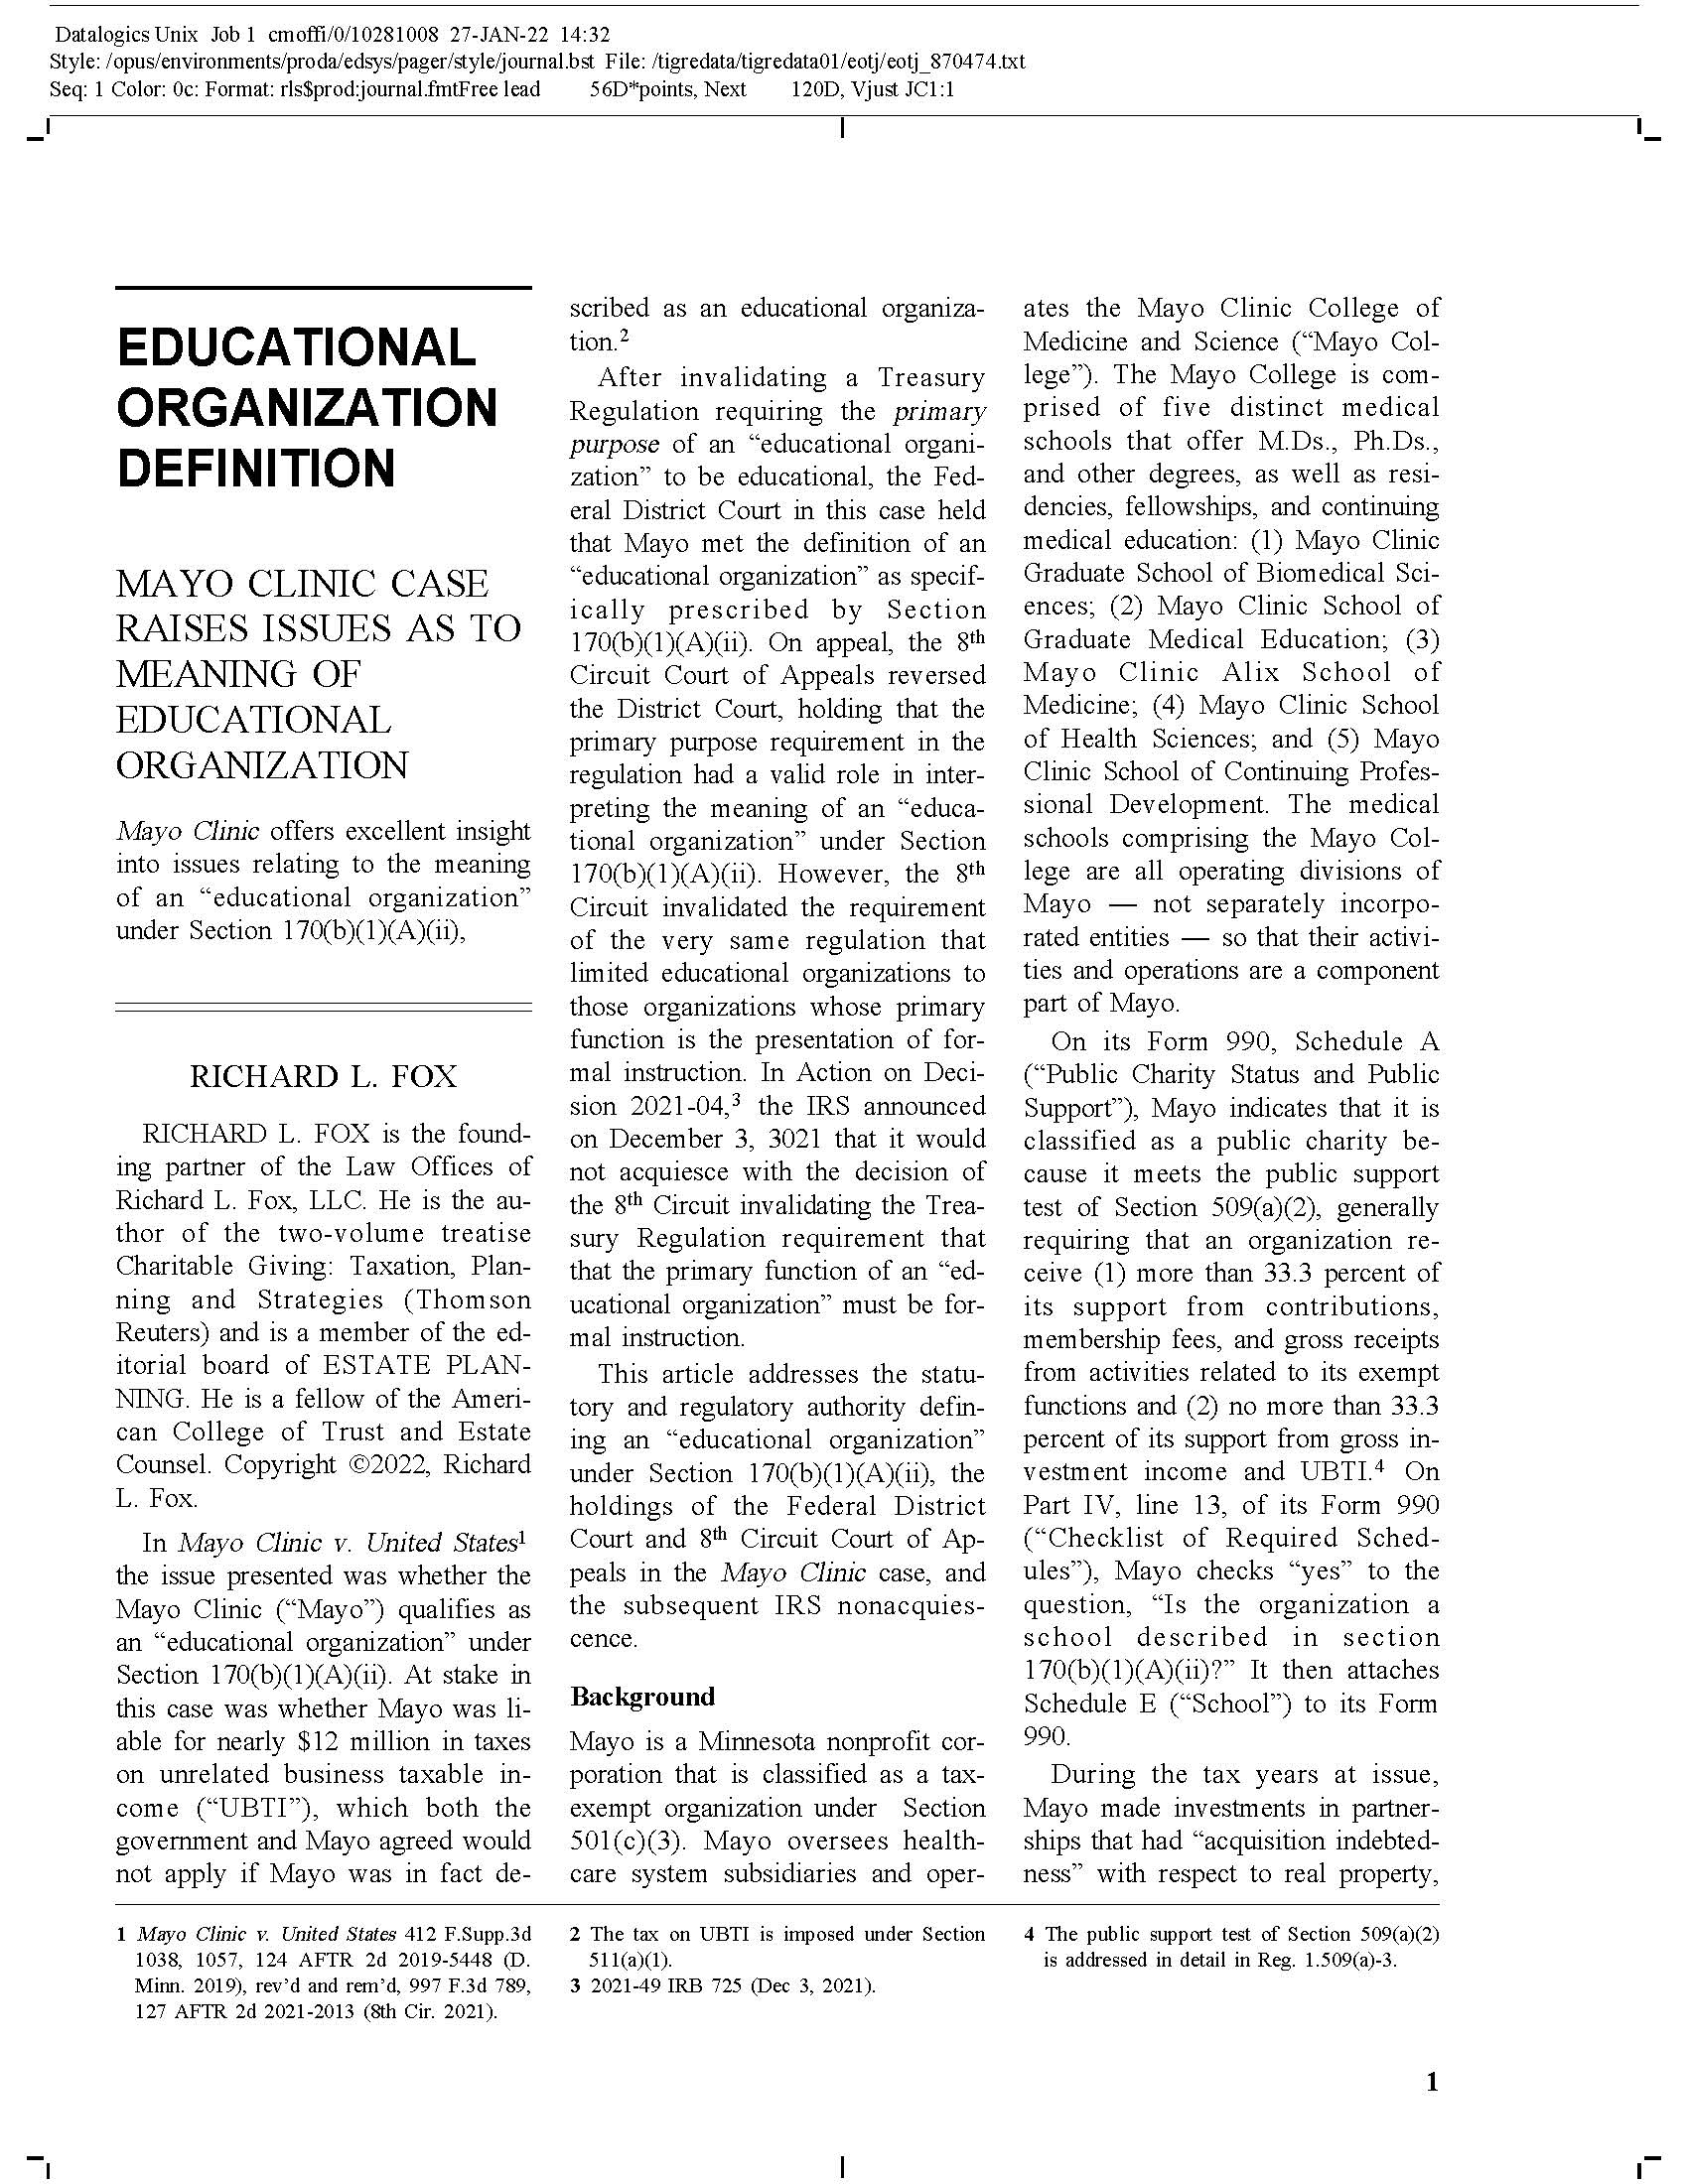 Galleys for Mayo Article_Page_1